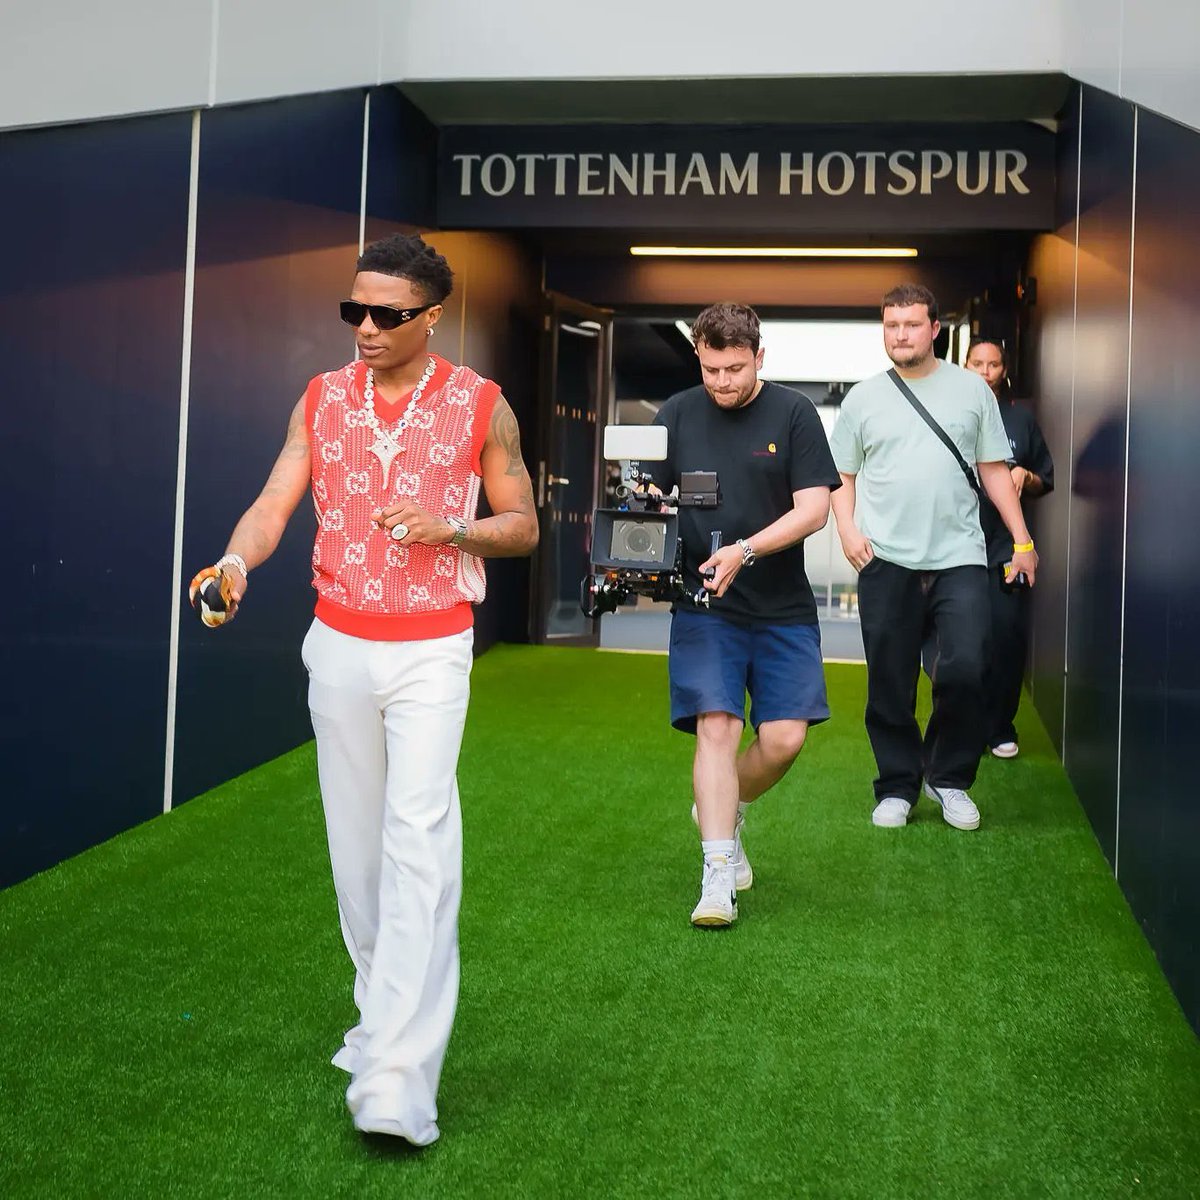 33 days to wizkid show in Tottenham Hotspur stadium 🏟️ history in the making don't snooze